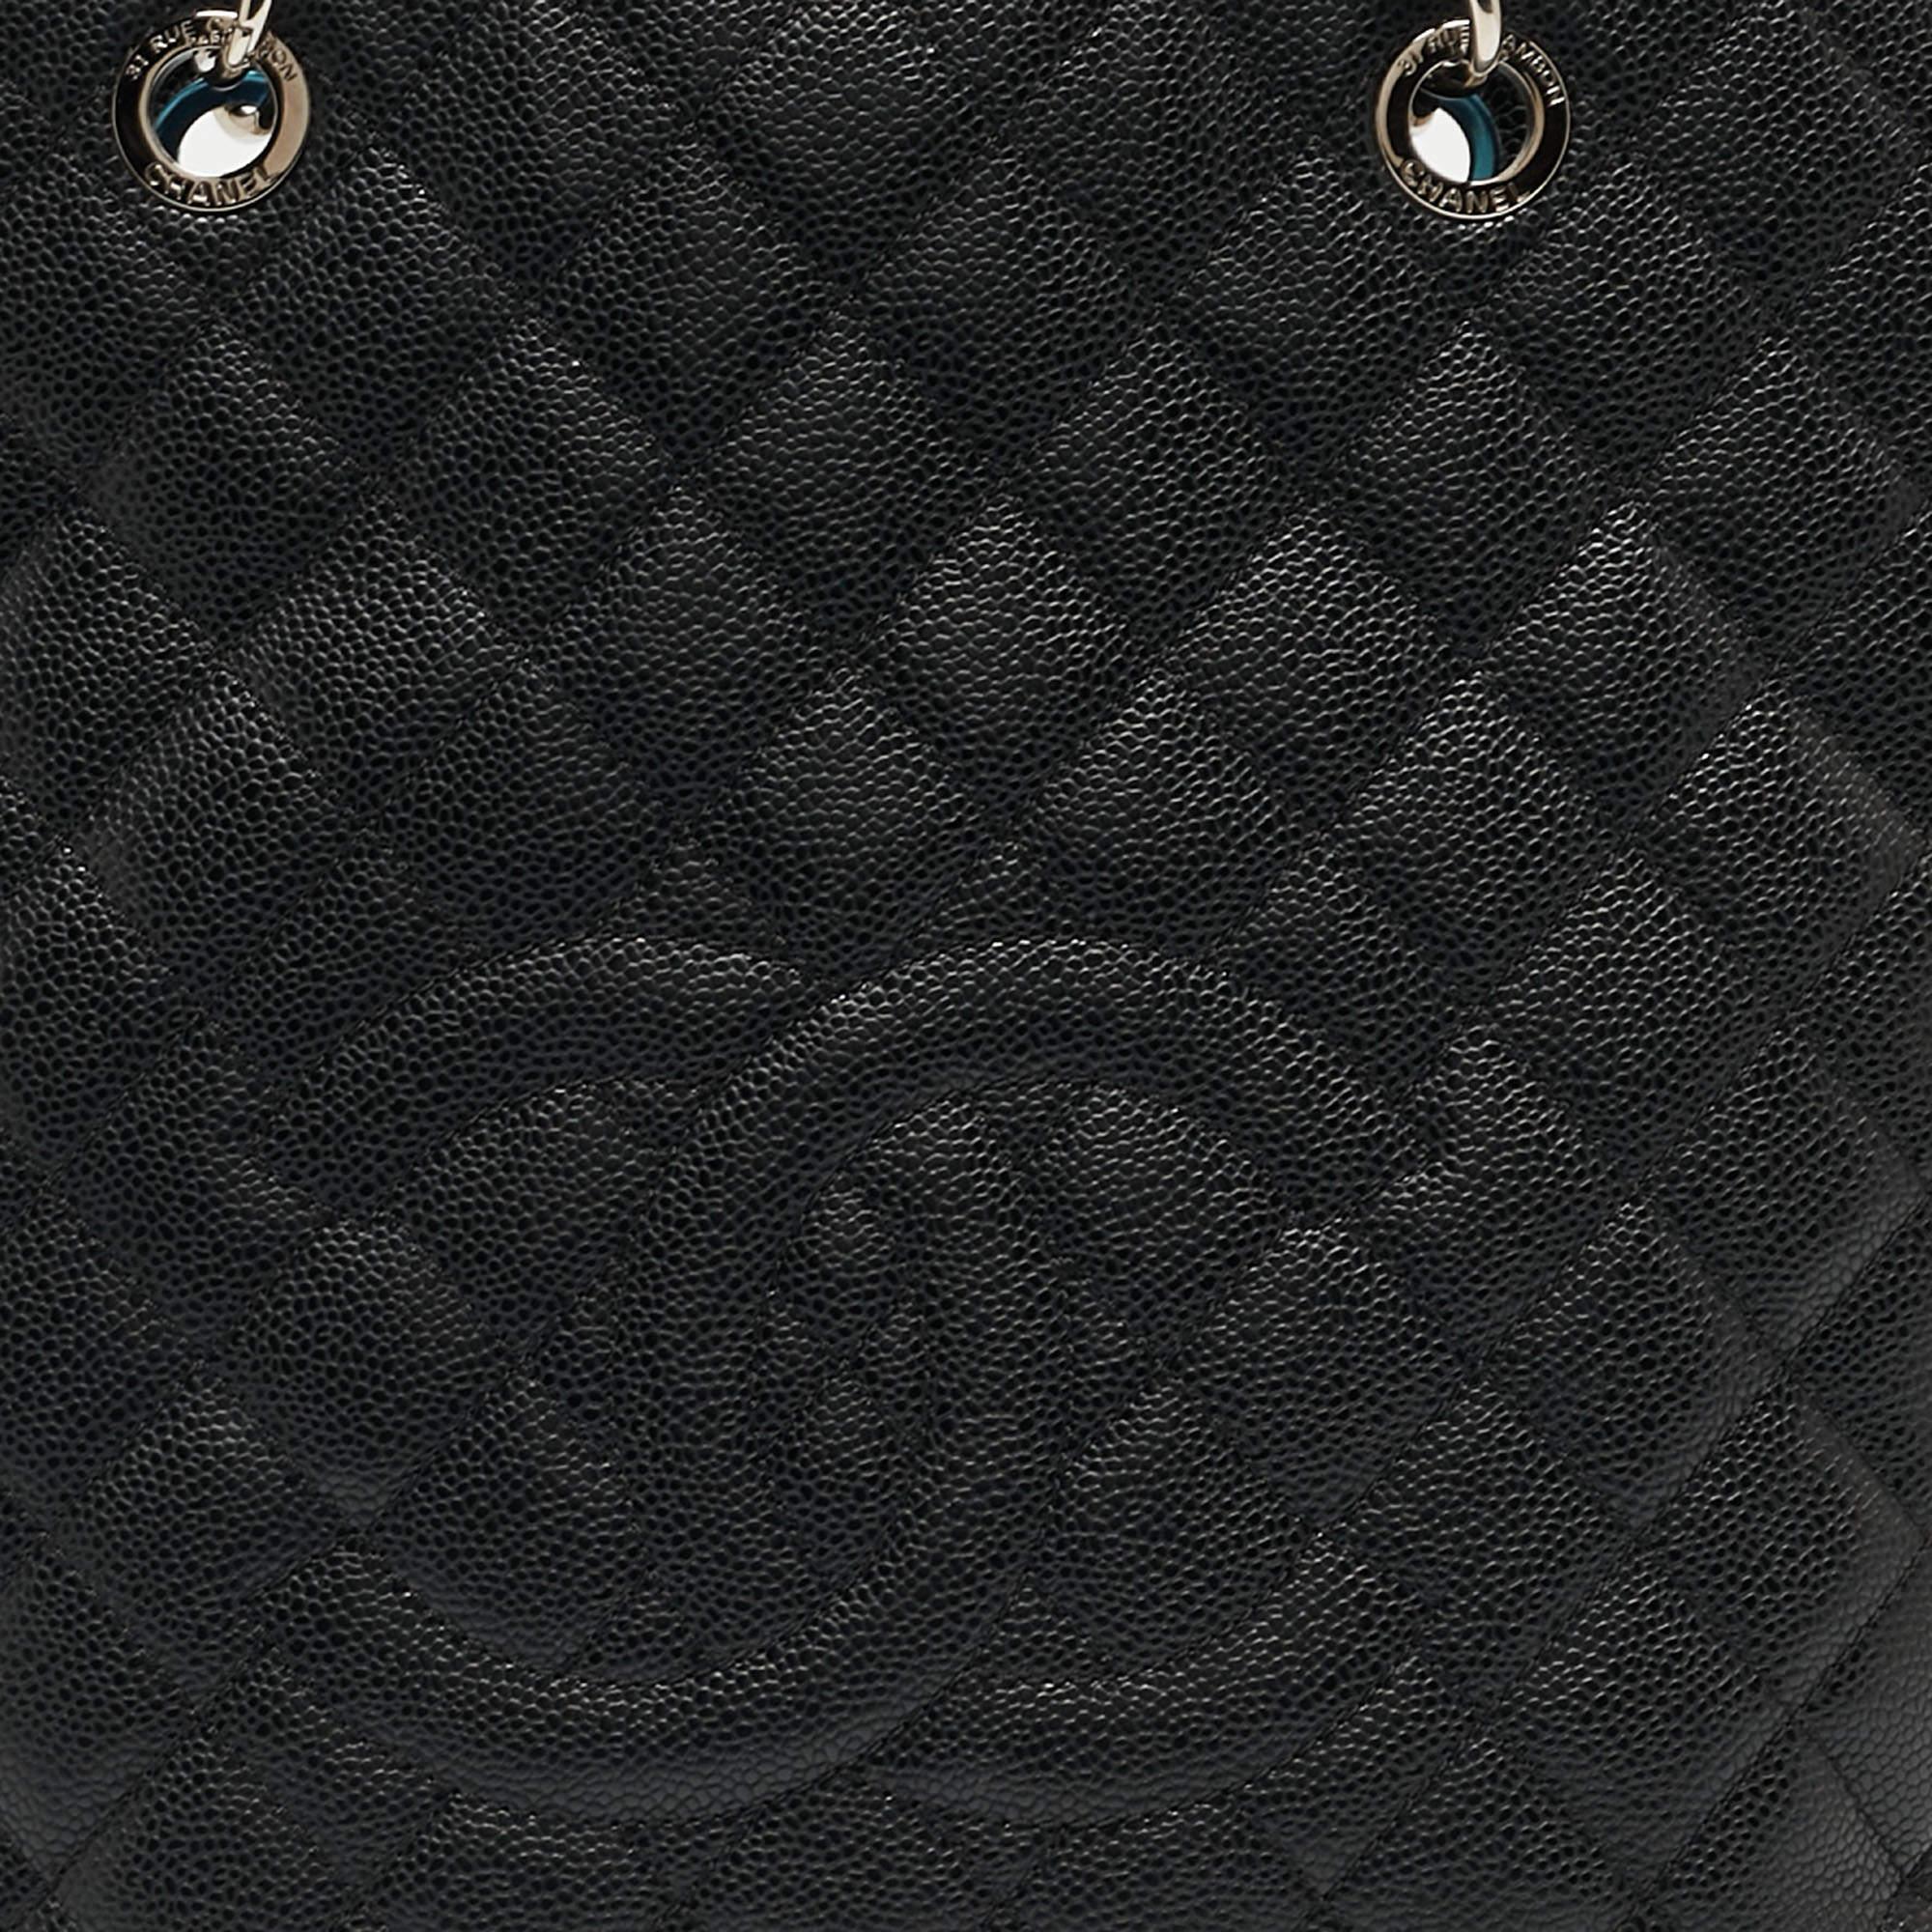 Chanel Black Caviar Quilted Leather CC Tote For Sale 8